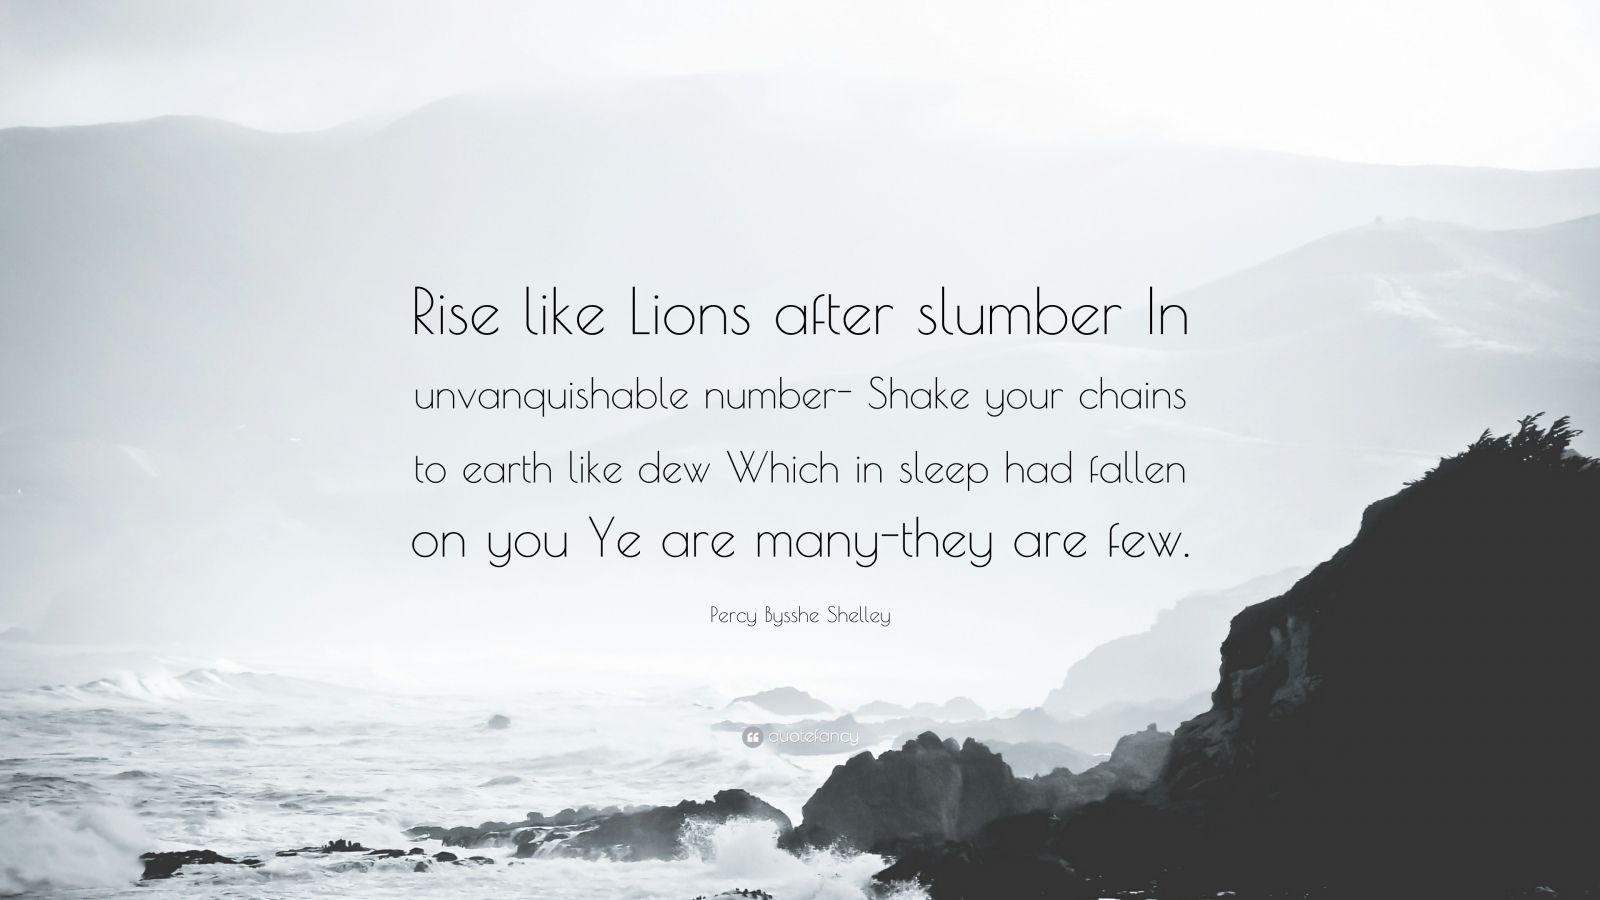 Percy Bysshe Shelley Quote: “Rise like Lions after slumber In  unvanquishable number- Shake your chains to earth like dew Which in sleep  had fallen on...”